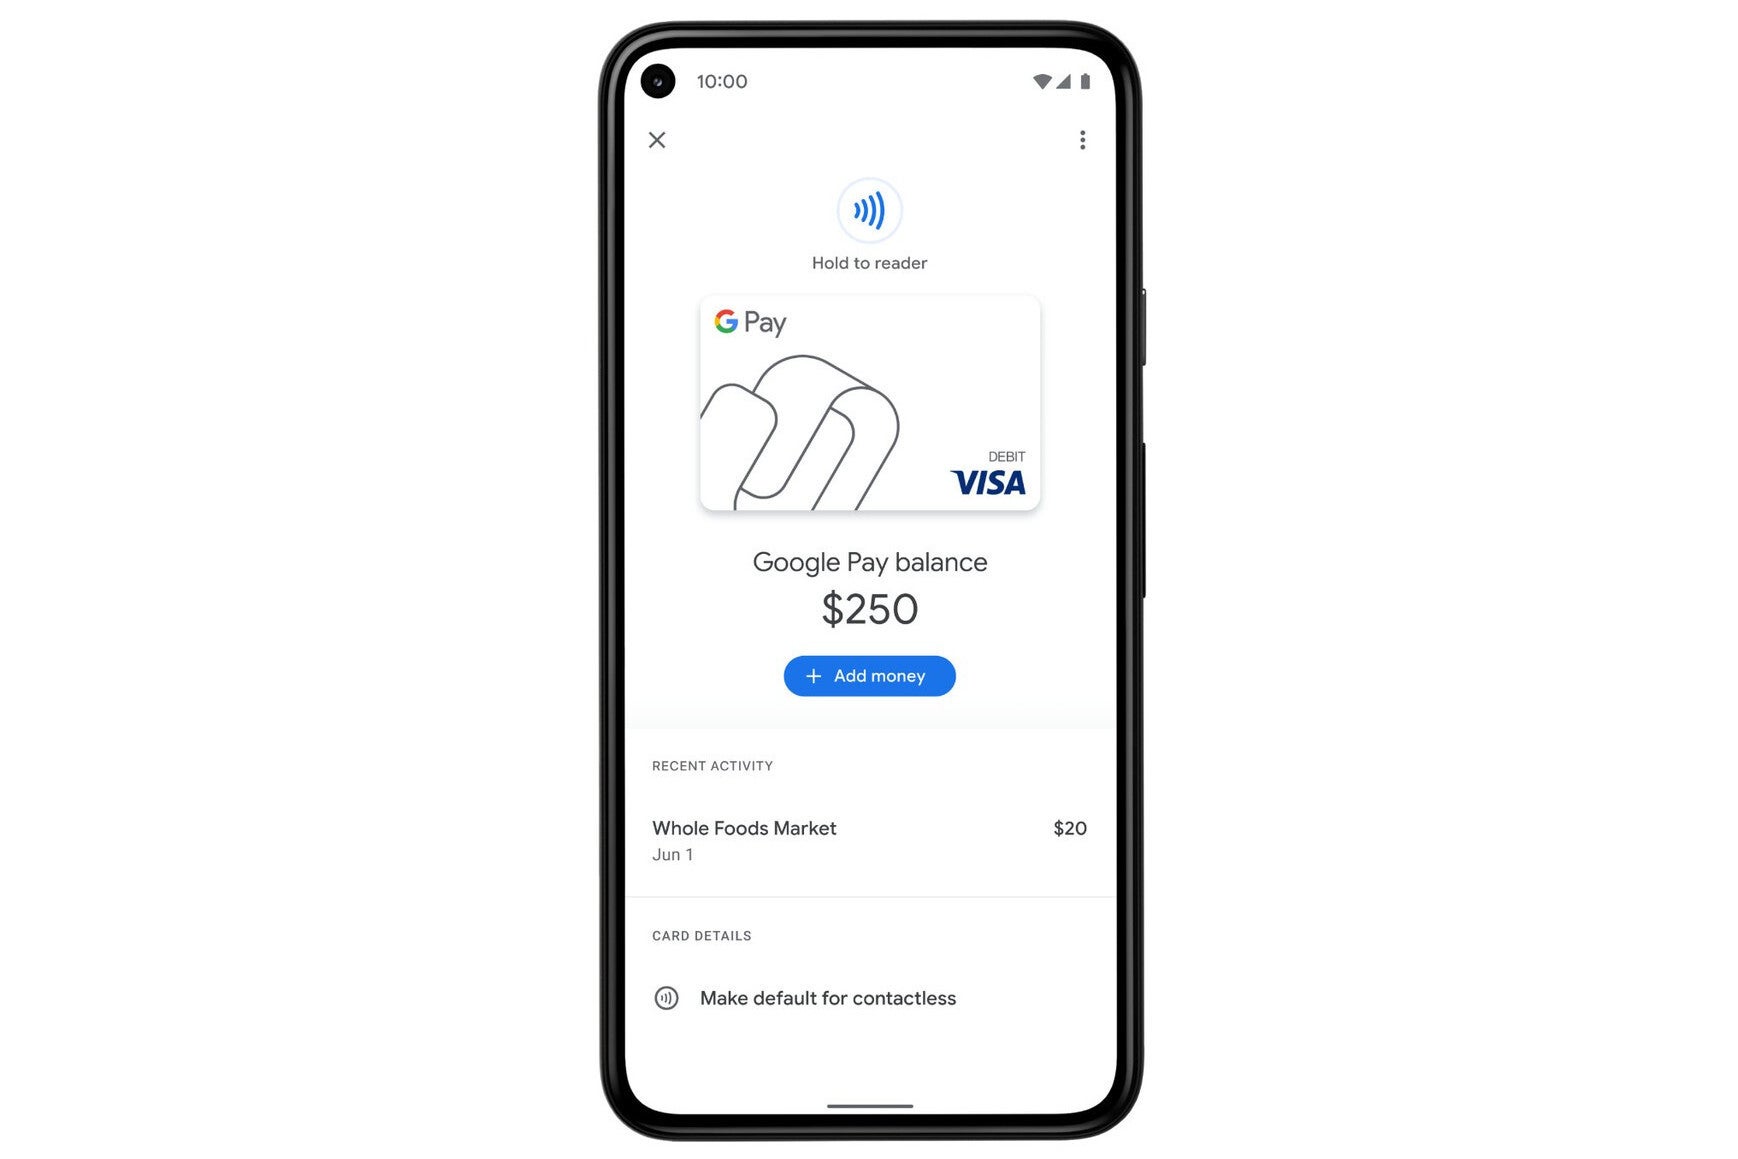 Users in the States will now be able to pay in stores with a Google Pay virtual card